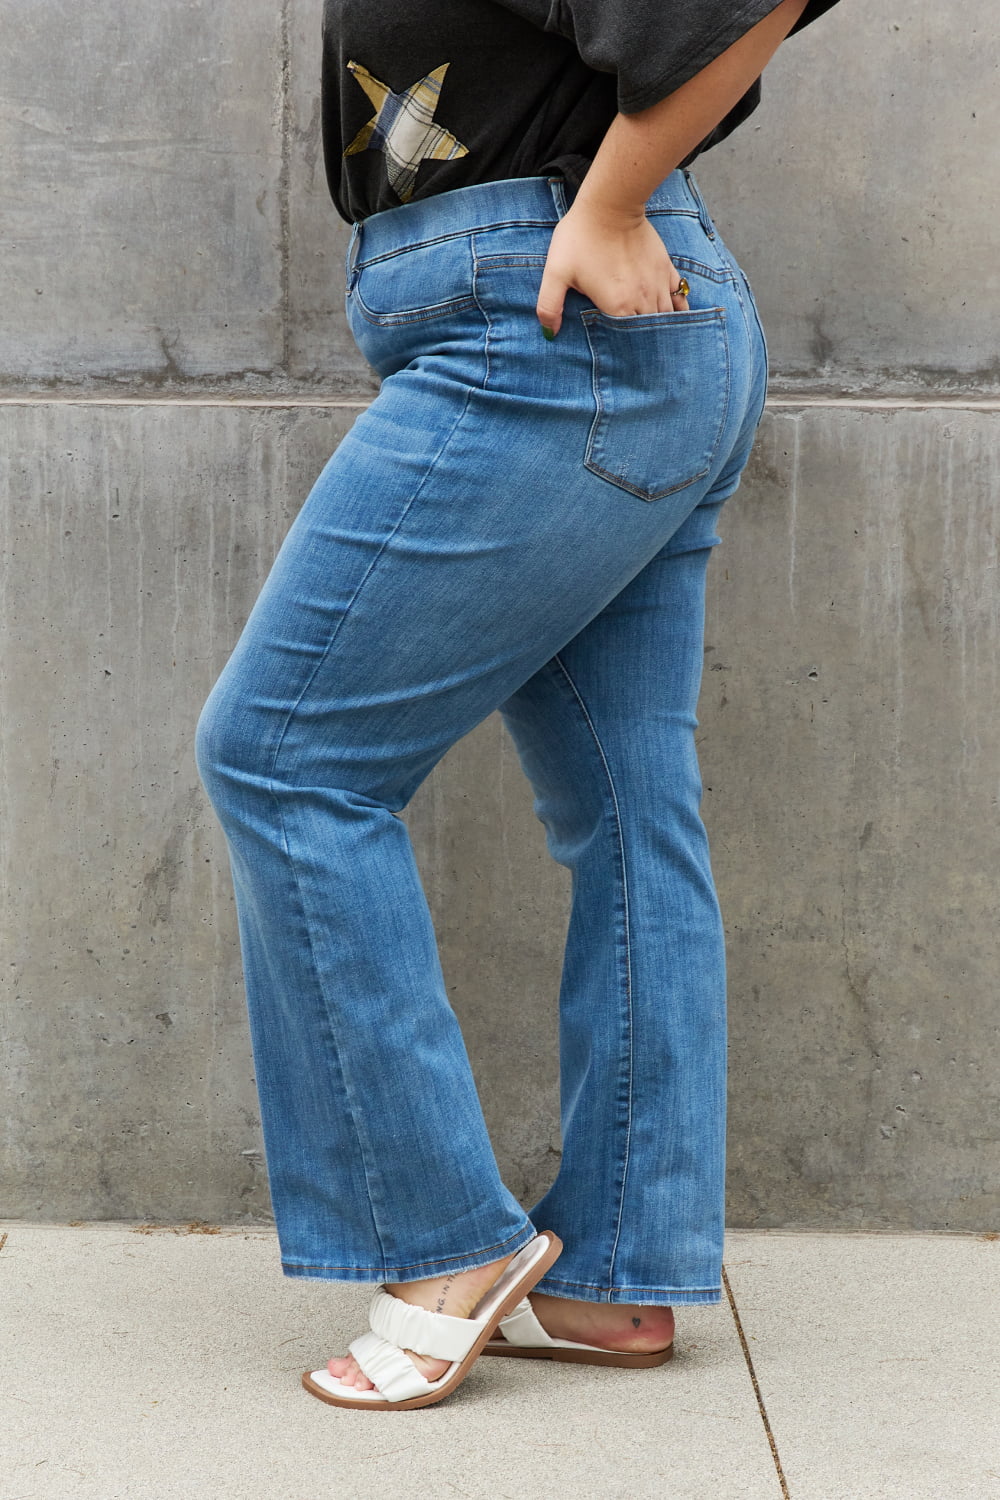 Judy Blue High Waist Pull On Bootcut Jeans - AnnRose Boutique